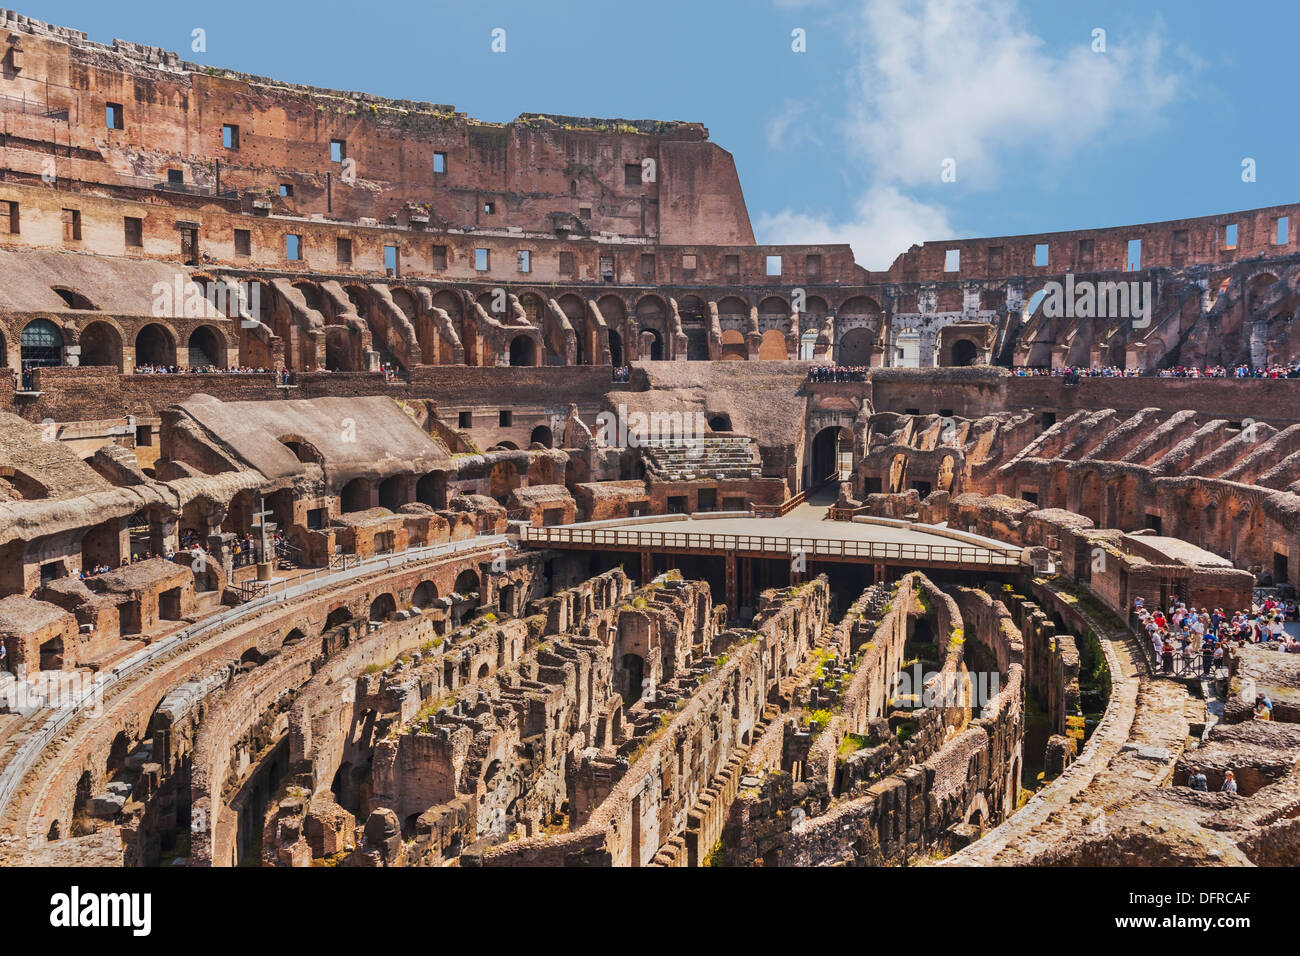 Interior view of the Colosseum, largest amphitheater in ancient Rome. It was built from 72 to 80 AD, Rome, Lazio, Italy, Europe Stock Photo